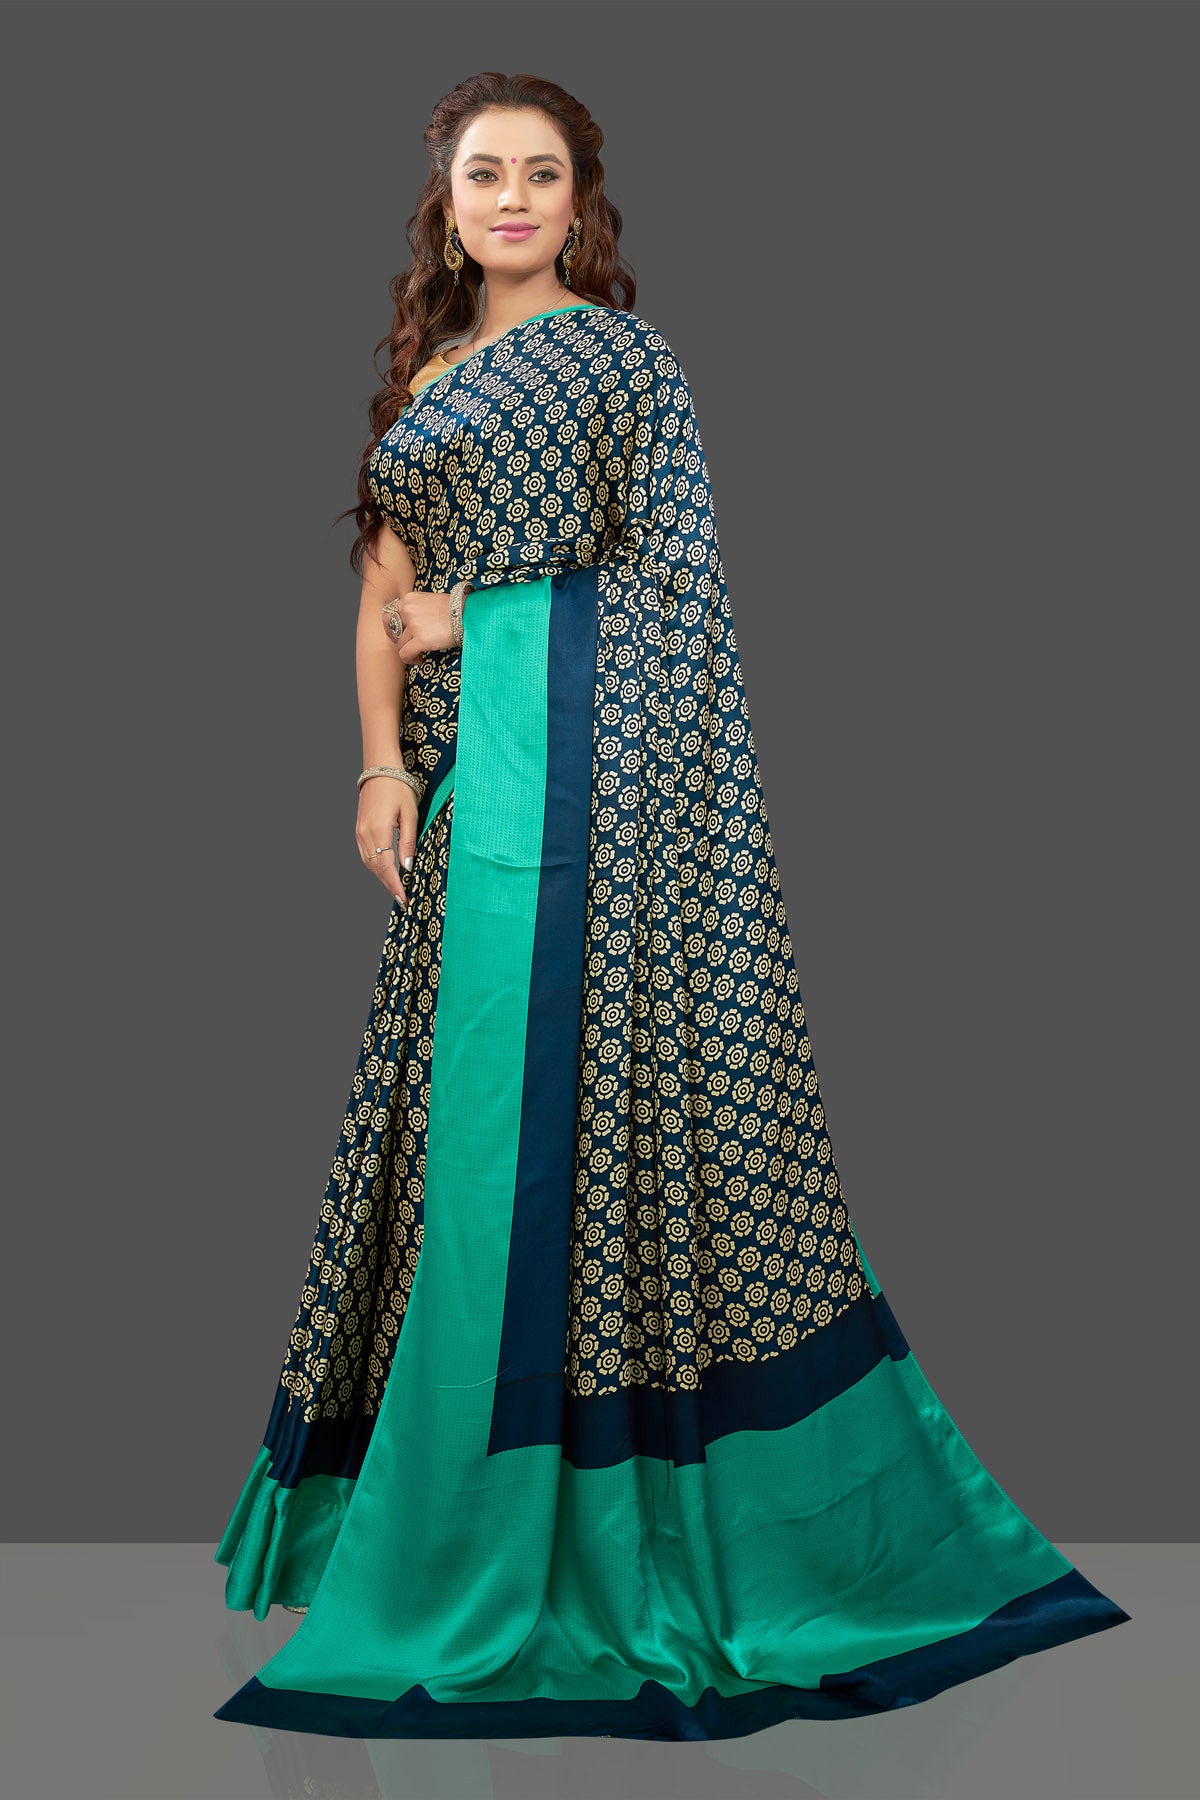 Buy elegant dark blue crepe silk sari online in USA with solid green border. Elevate your Indian style on special occasions in beautiful designer sarees, crepe silk sarees, georgette saris, printed sarees from Pure Elegance Indian clothing store in USA.-pallu